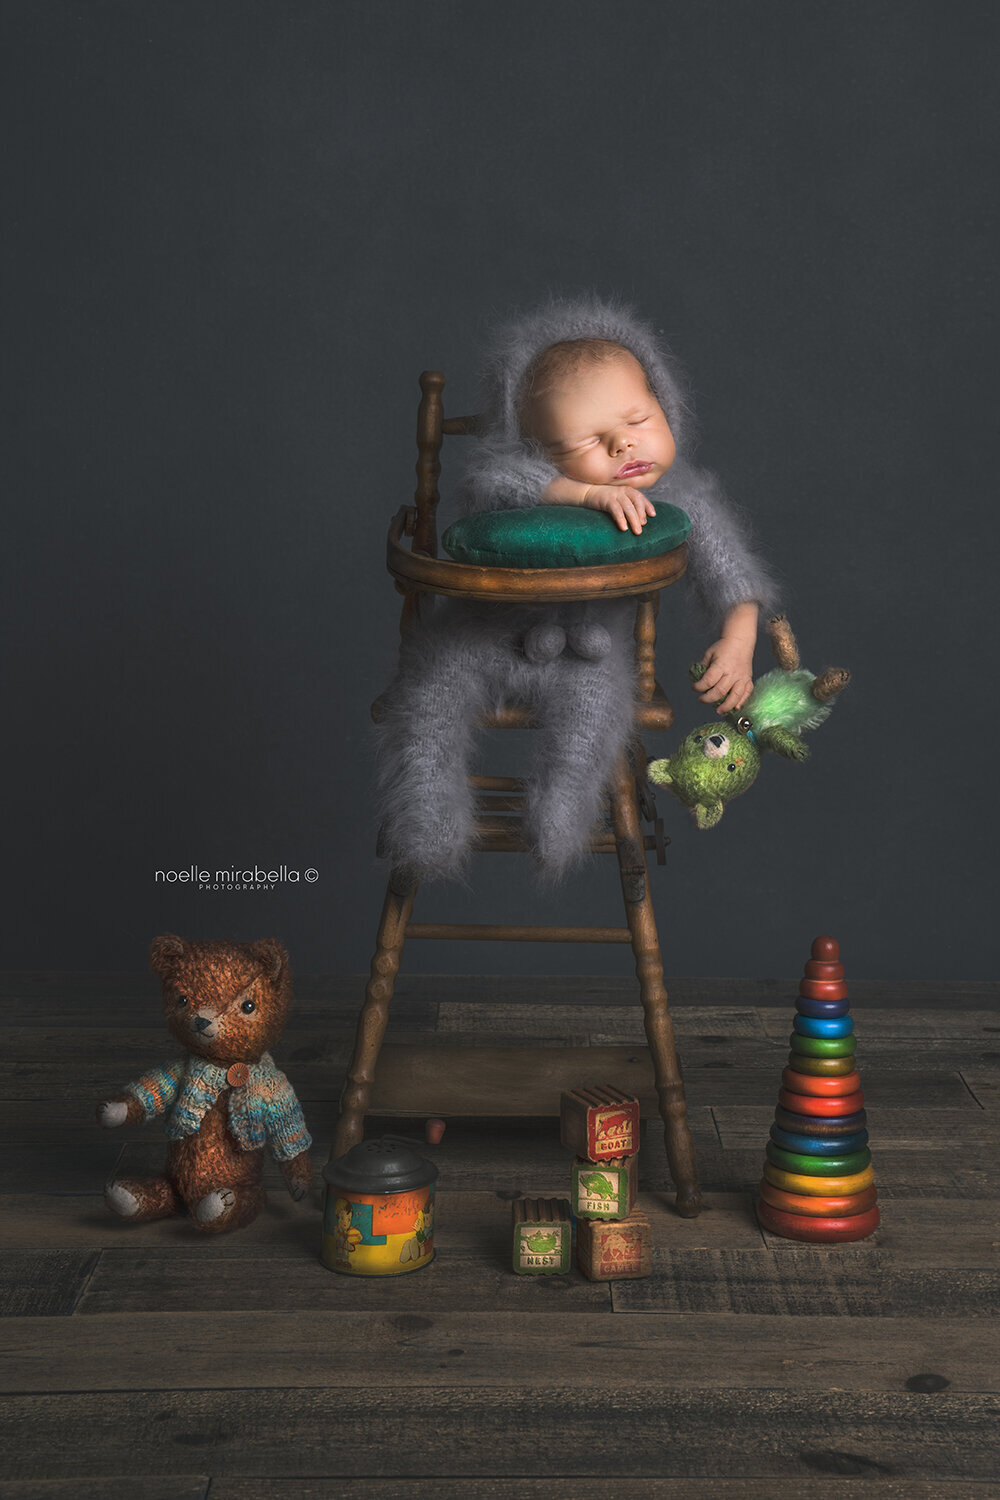 Newbornbaby sleeping in highchair surrounded by vintage toys and bears.